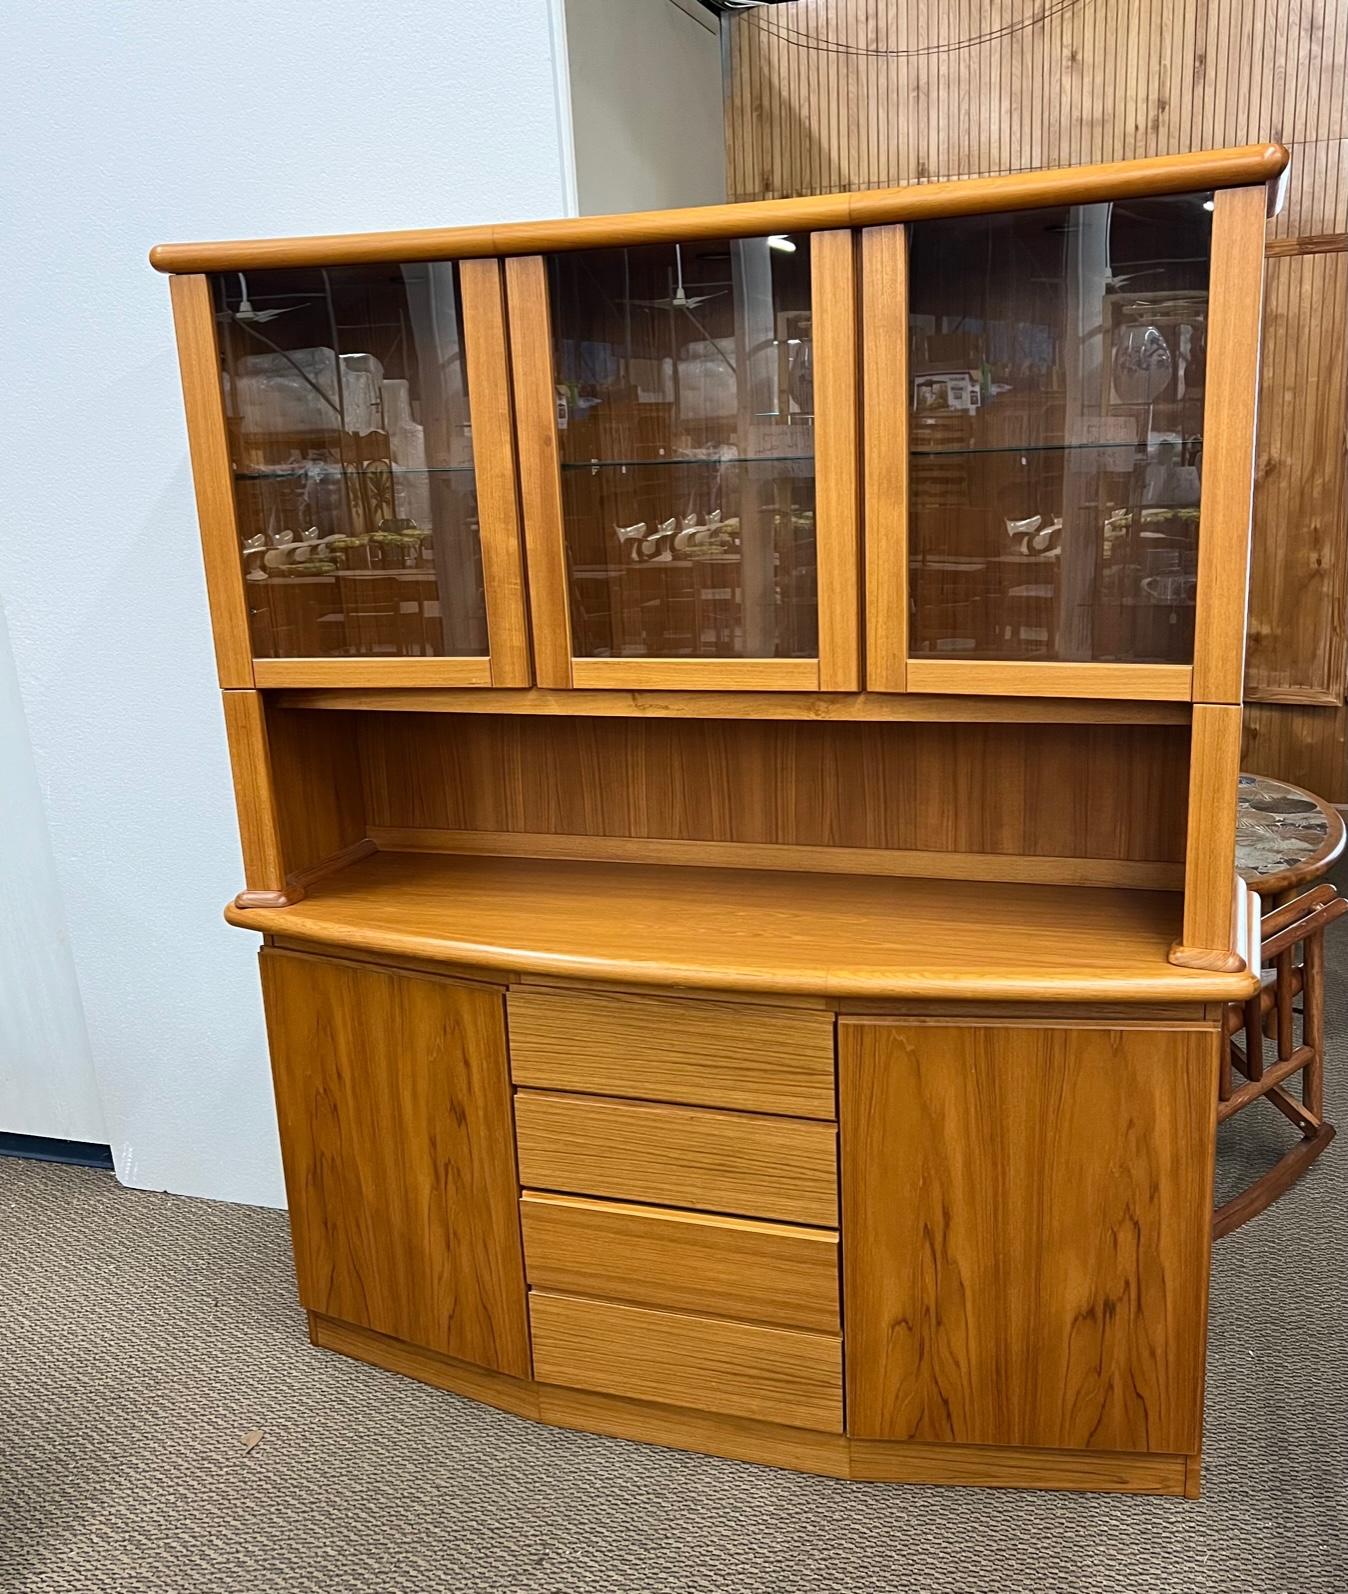 Large Danish teak buffet with hutch. Pristine condition. Featuring adjustable glass shelves at the top. Adjustable wood shelves at the bottom. Four clean drawers. Top drawer with green baize.

Dimensions: 63.5